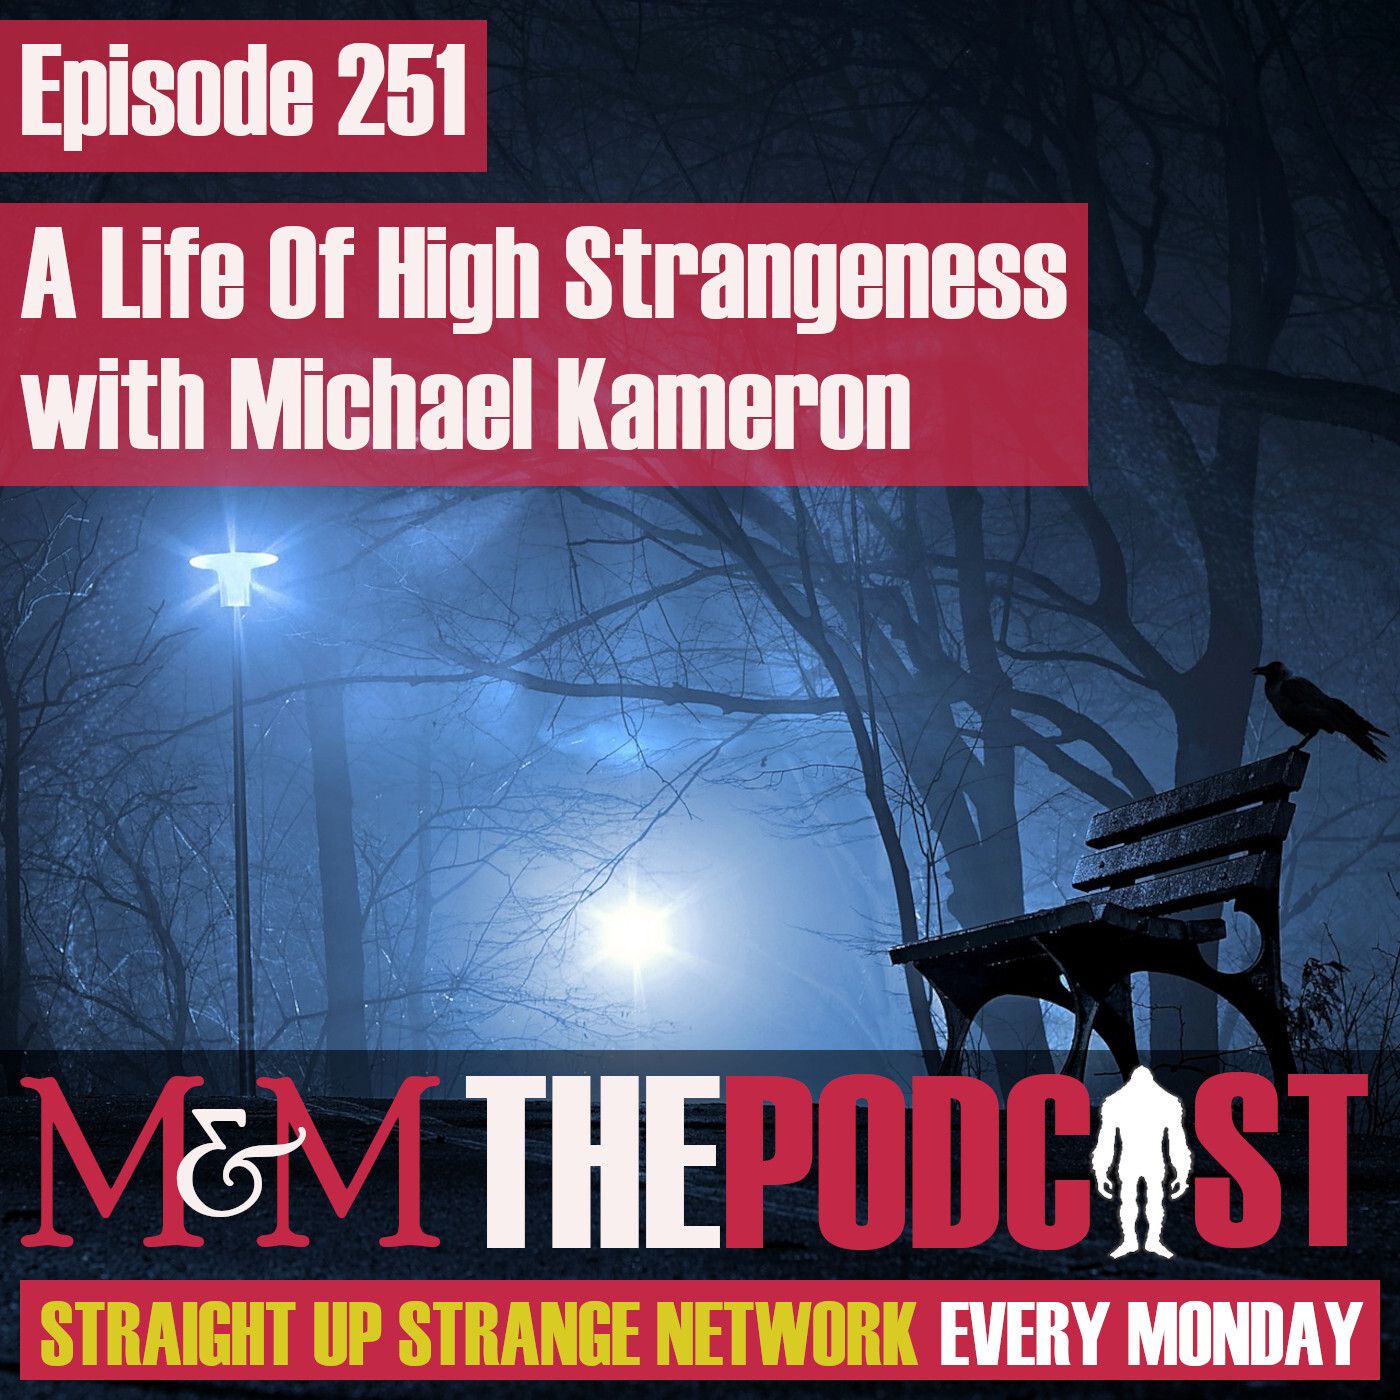 Mysteries and Monsters: Episode 251 A Life Of High Strangeness with Michael Kameron